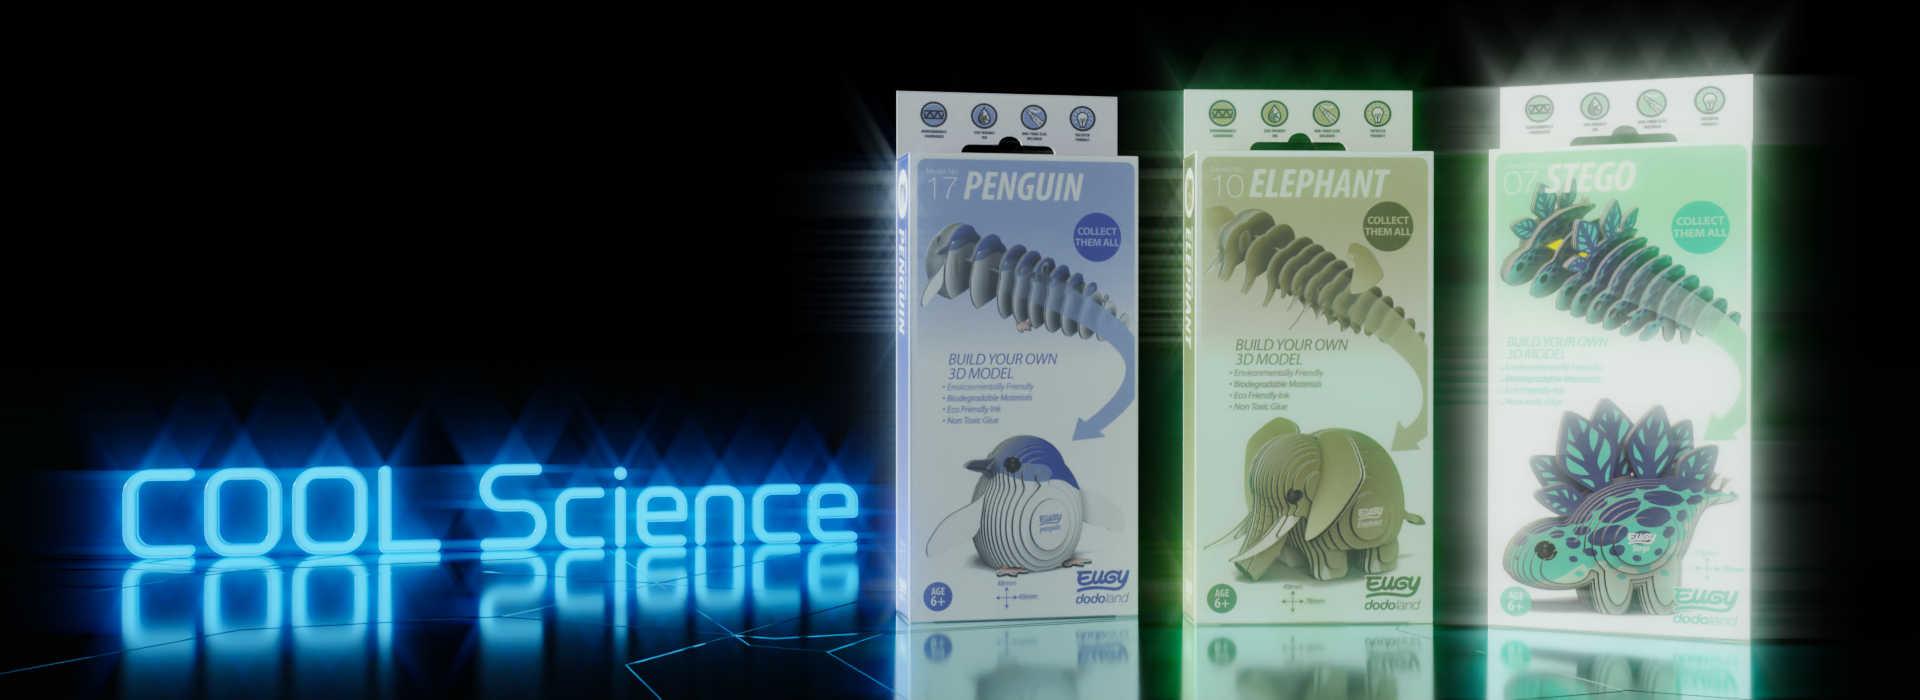 A selection of Eugy 3D Model kits available from COOL Science